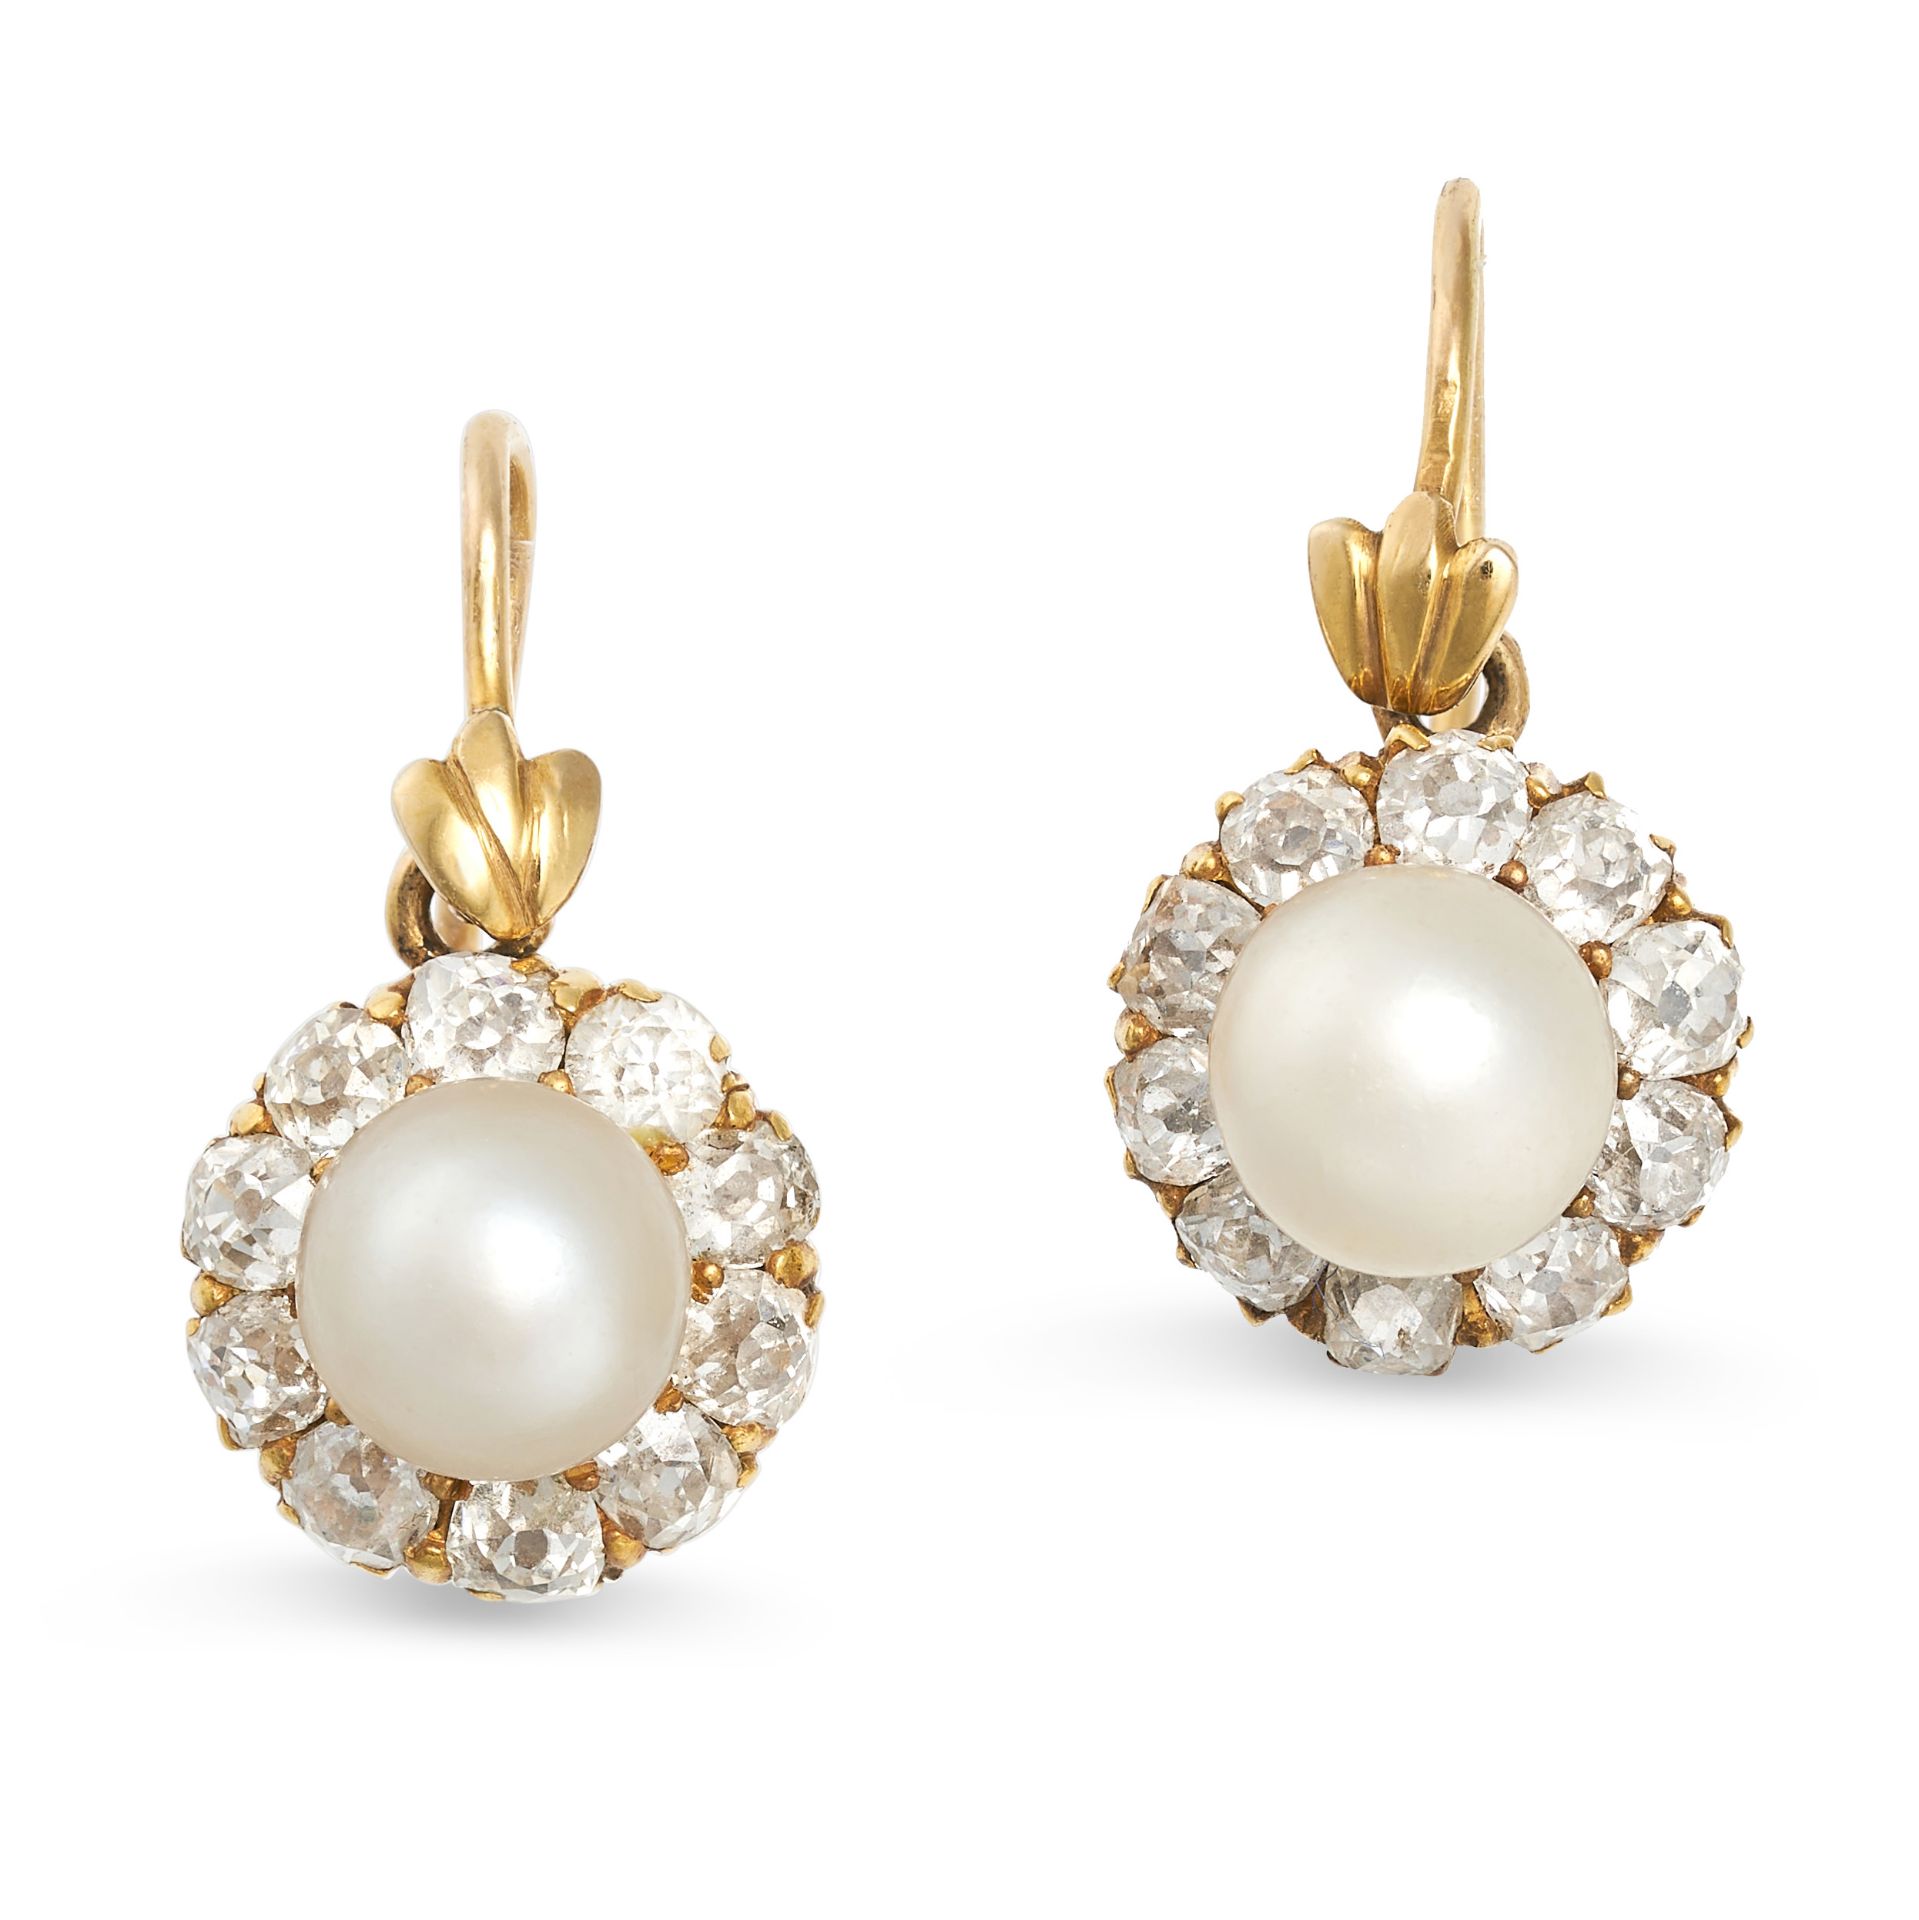 A PAIR OF ANTIQUE PEARL AND DIAMOND EARRINGS, EARLY 20TH CENTURY in yellow gold, each set with a ...